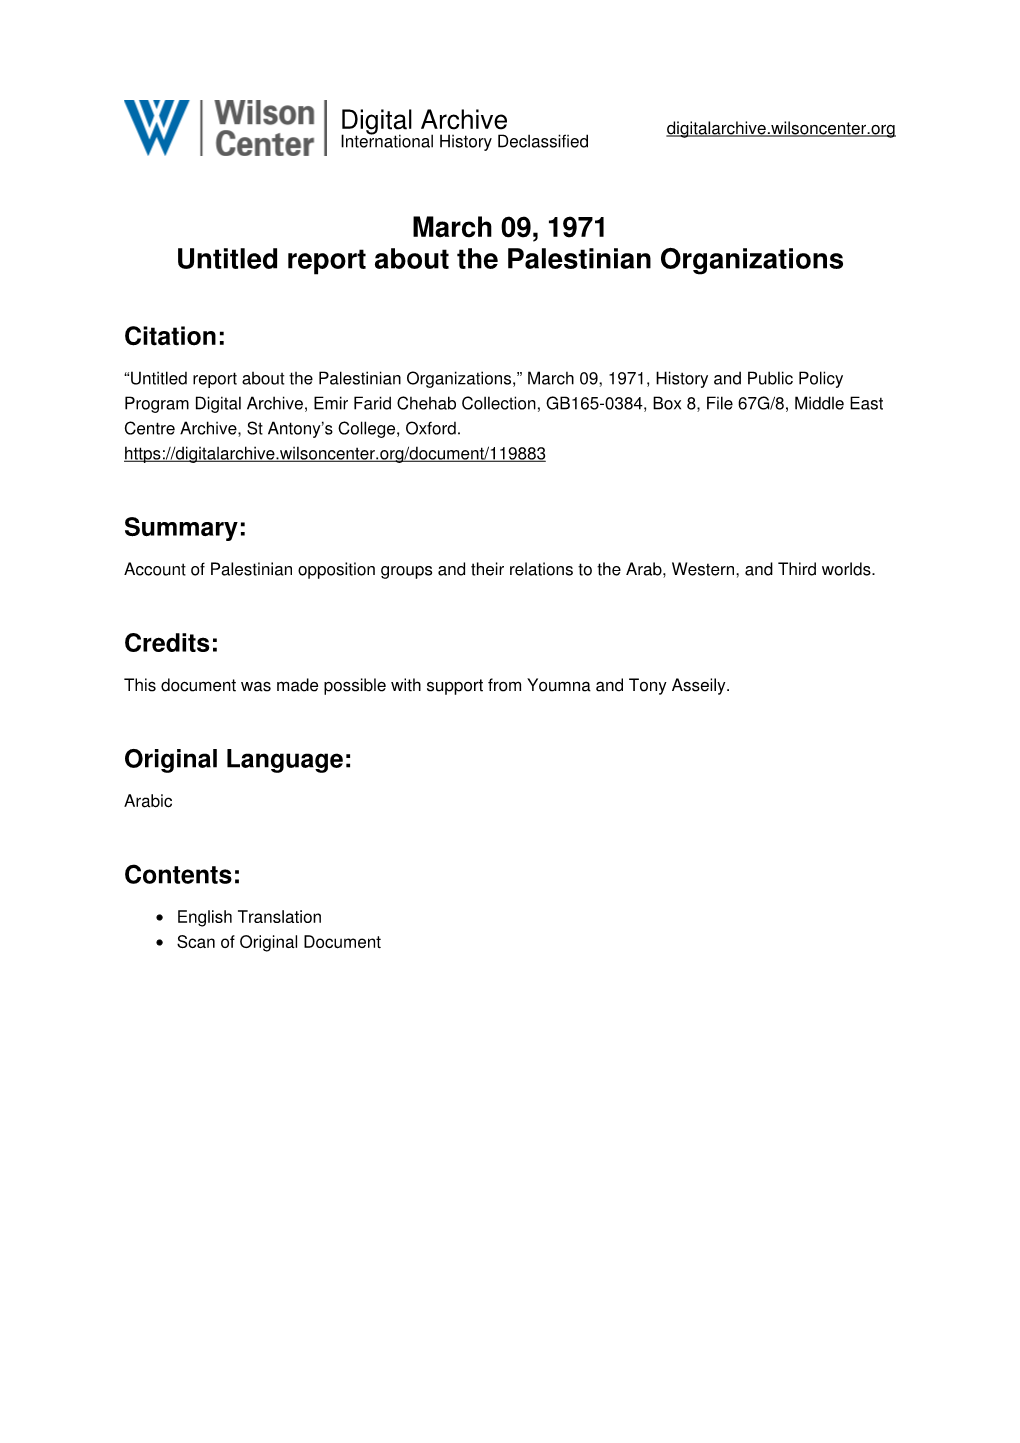 March 09, 1971 Untitled Report About the Palestinian Organizations